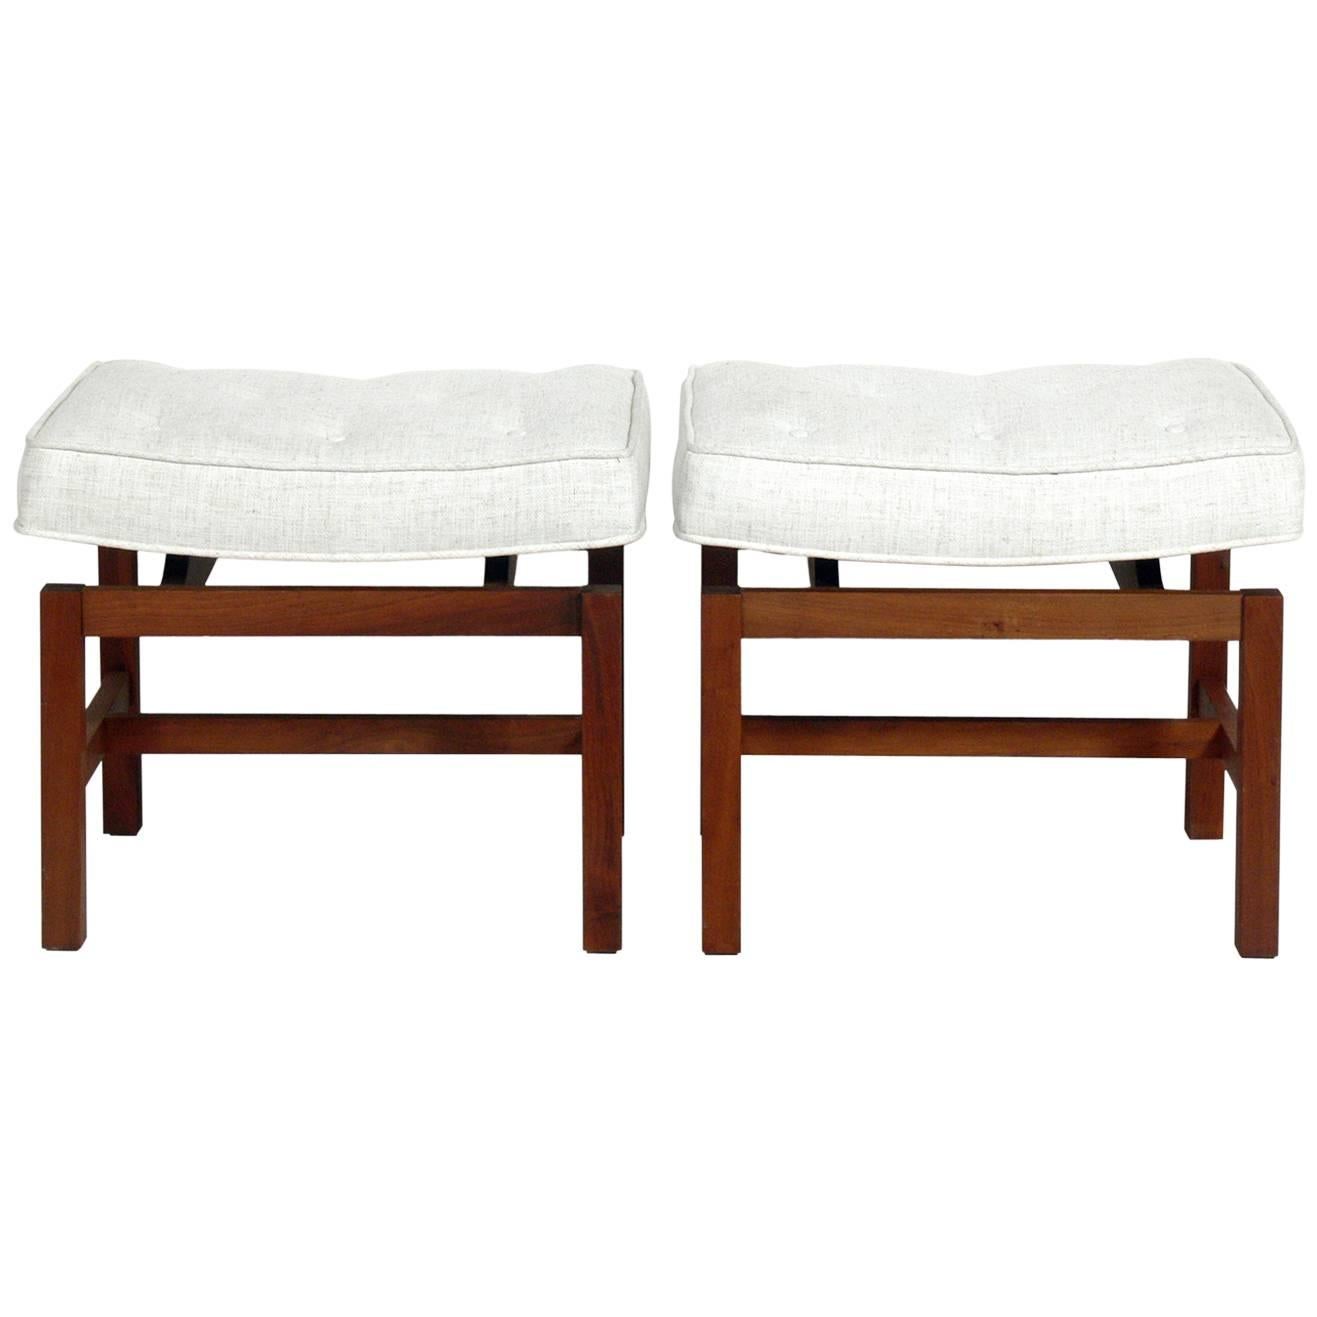 Pair of Modern Benches or Stools Designed by Jens Risom